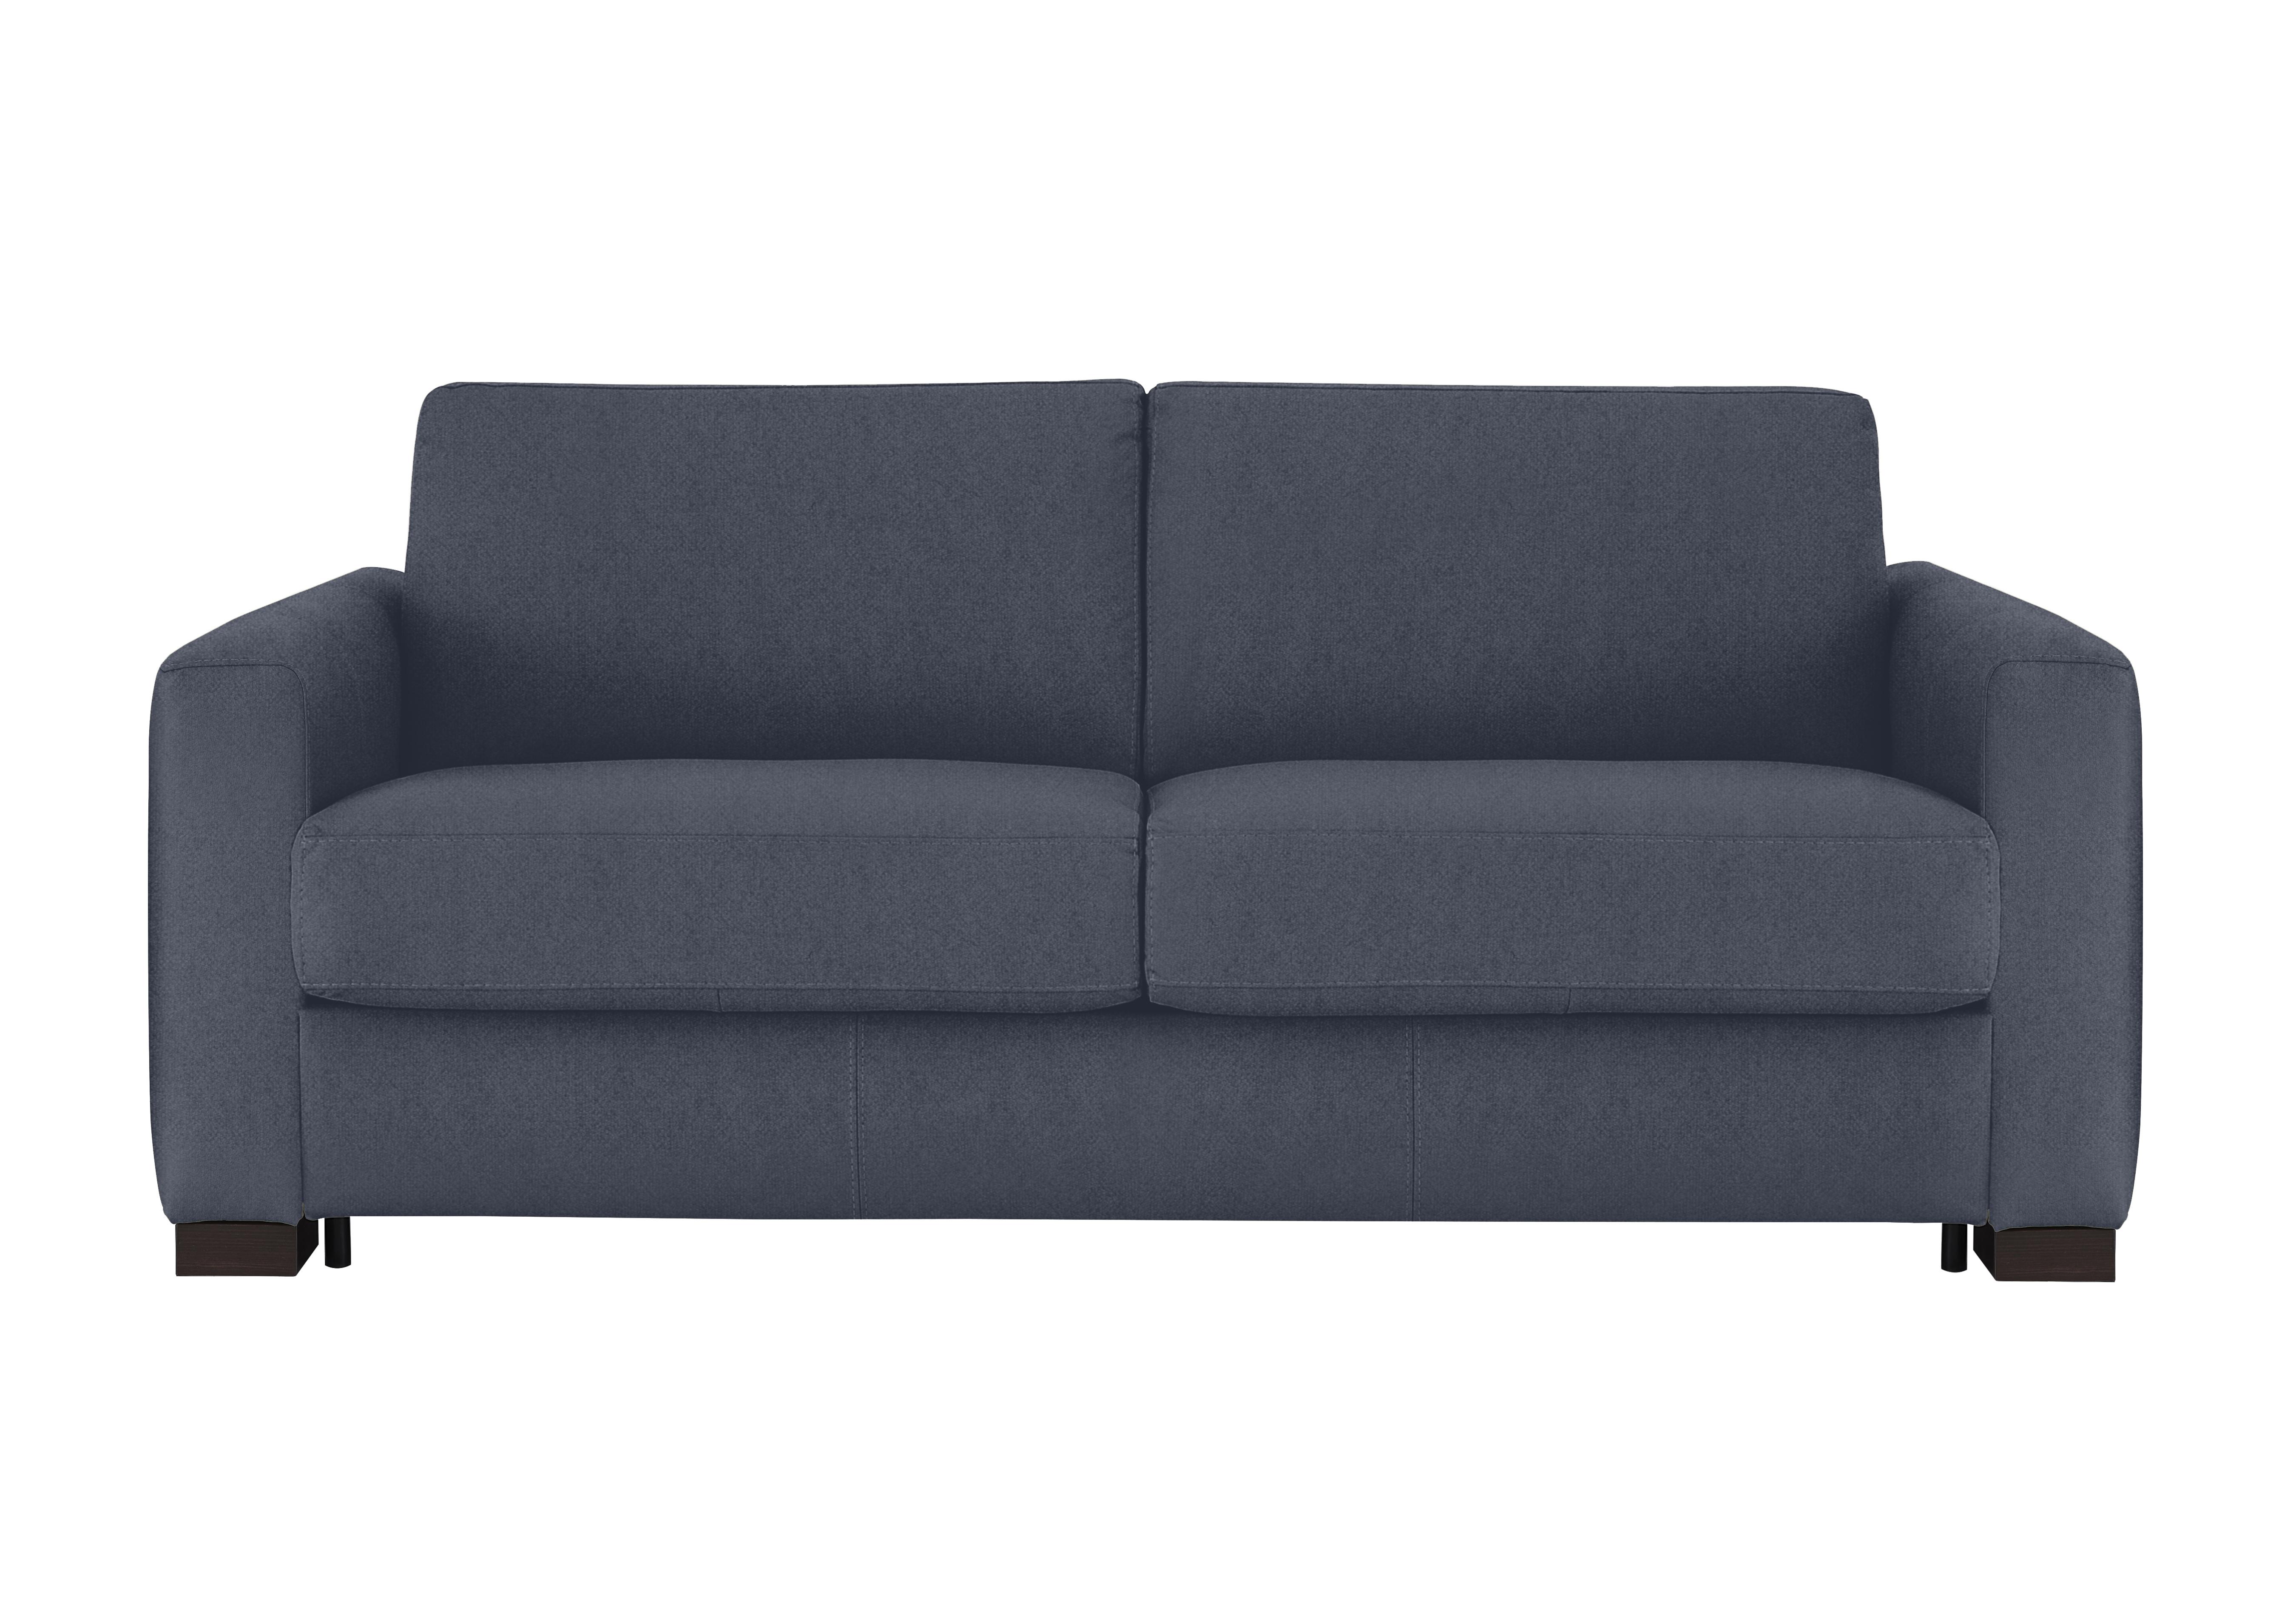 Alcova 3 Seater Fabric Sofa Bed with Box Arms in Fuente Ocean on Furniture Village